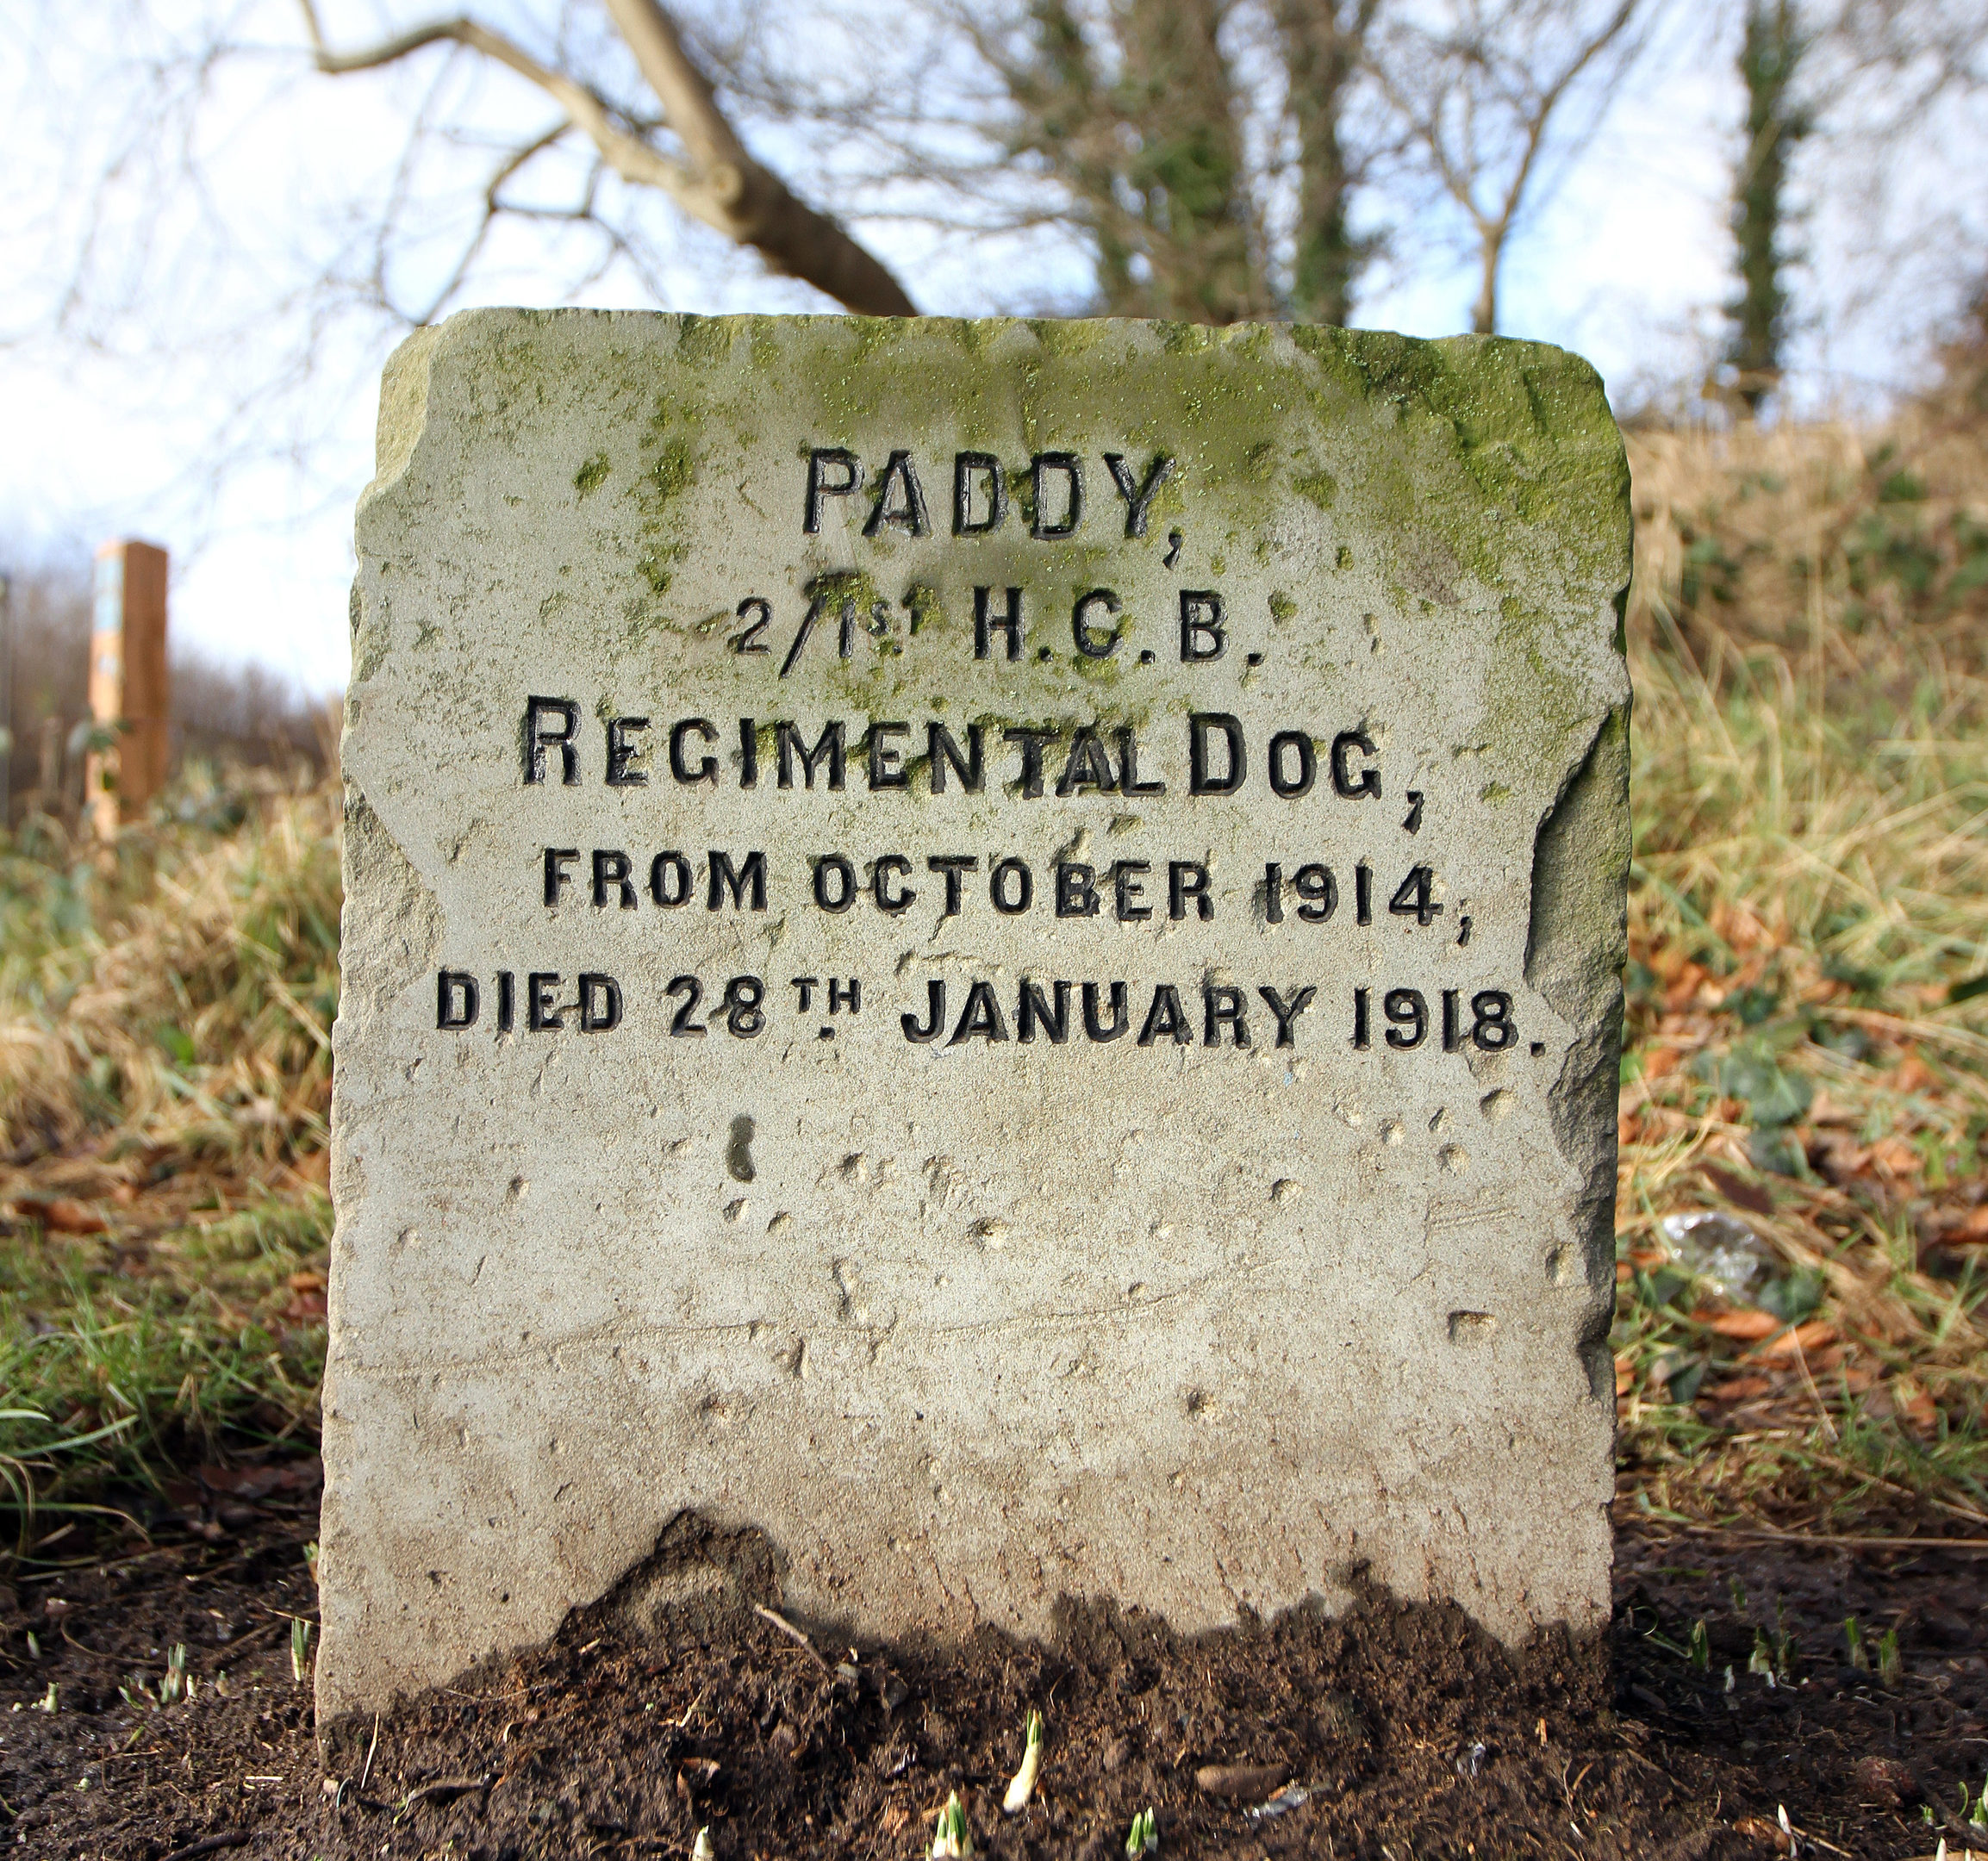 The grave to mark Paddys final resting place.